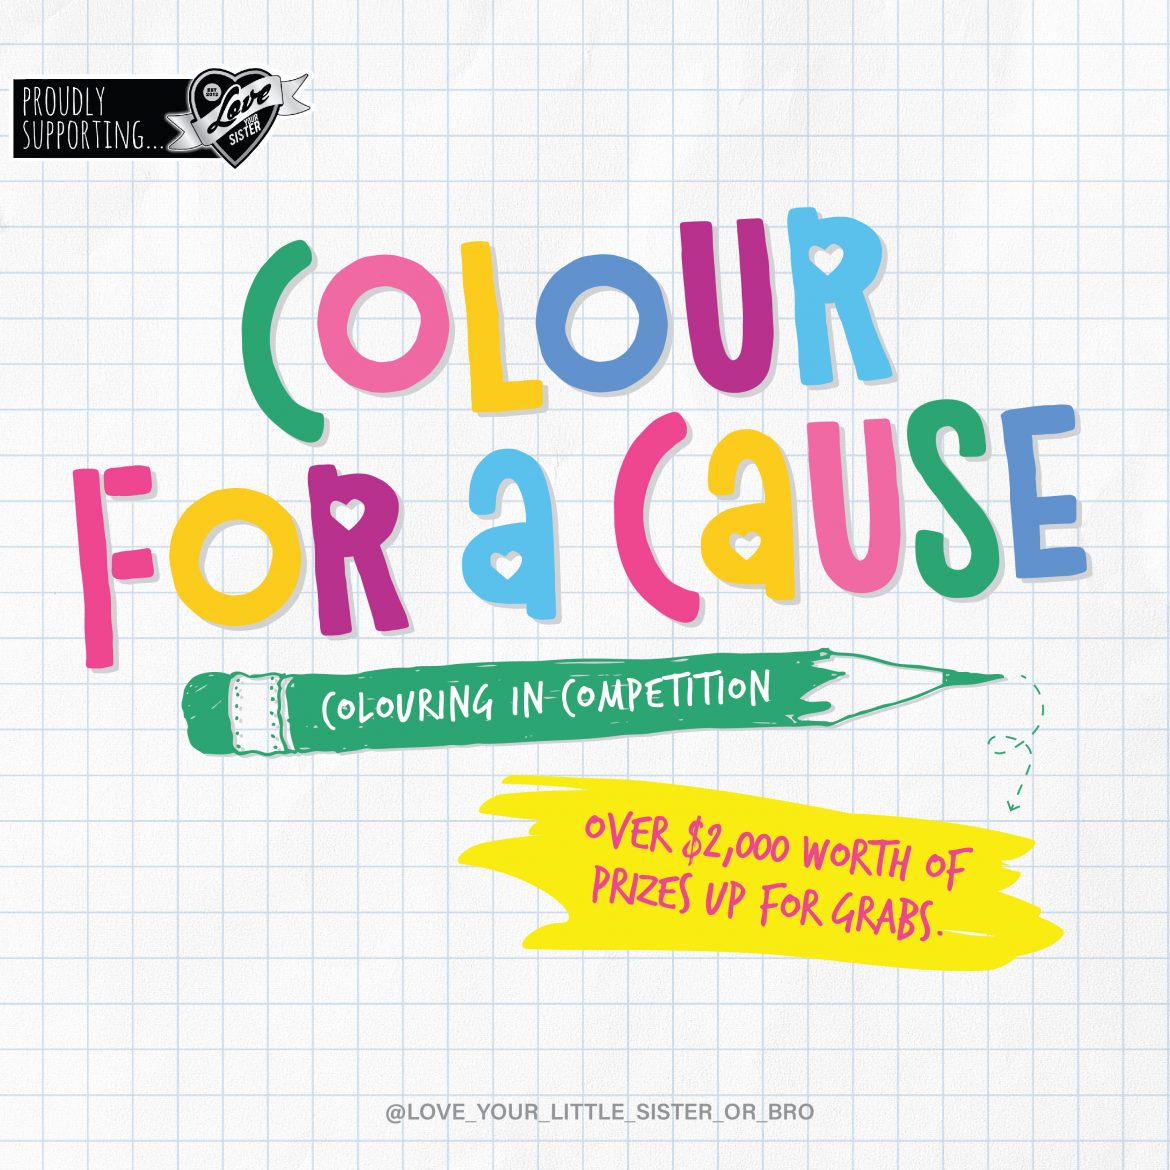 Colour for a cause